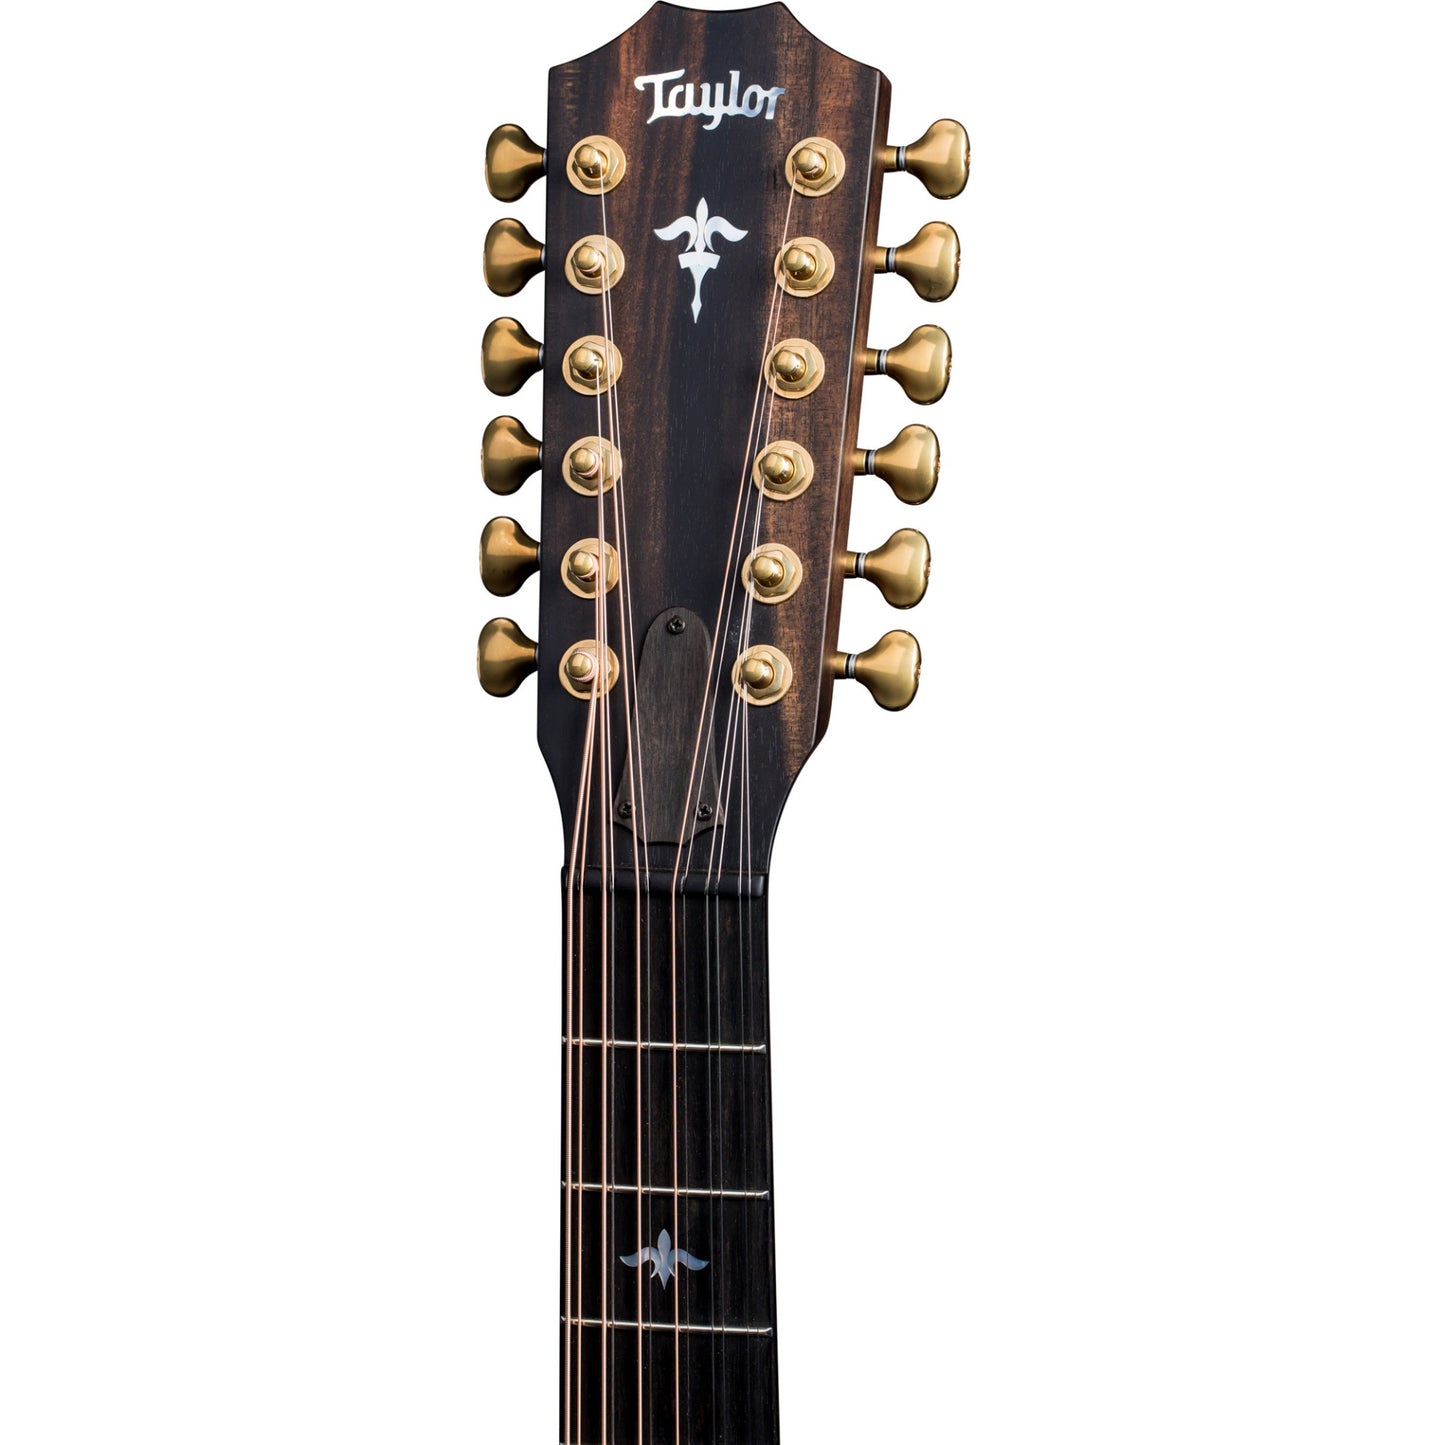 Taylor Builder's Edition 652ce WHB 12 String Acoustic Electric Guitar